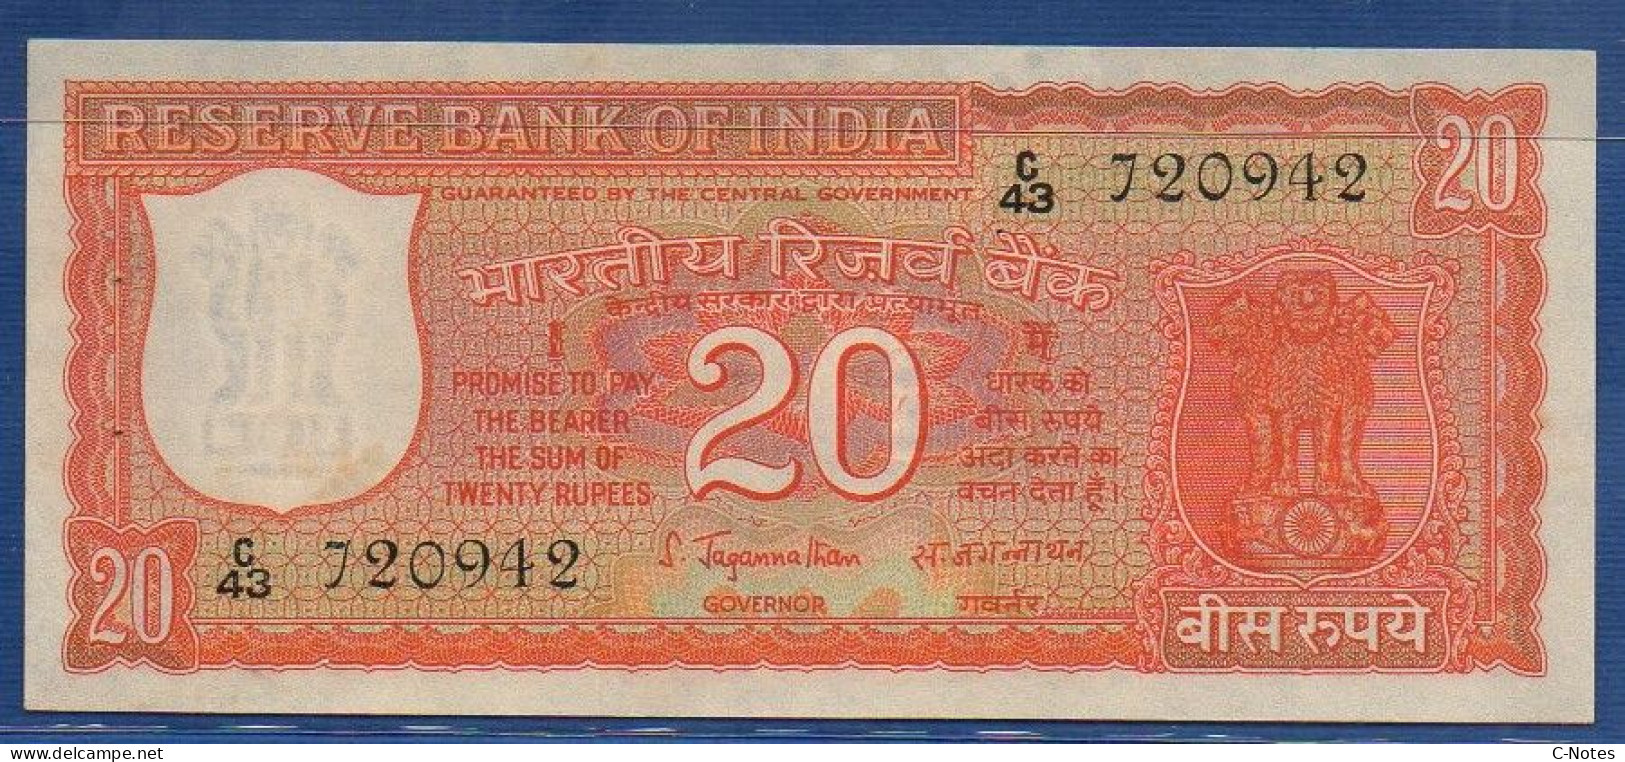 INDIA - P. 61b – 20 Rupees ND, UNC-,  Serie C43 720942 - Blank Space Under Signature - S. Jagannathan (1970) - Inde